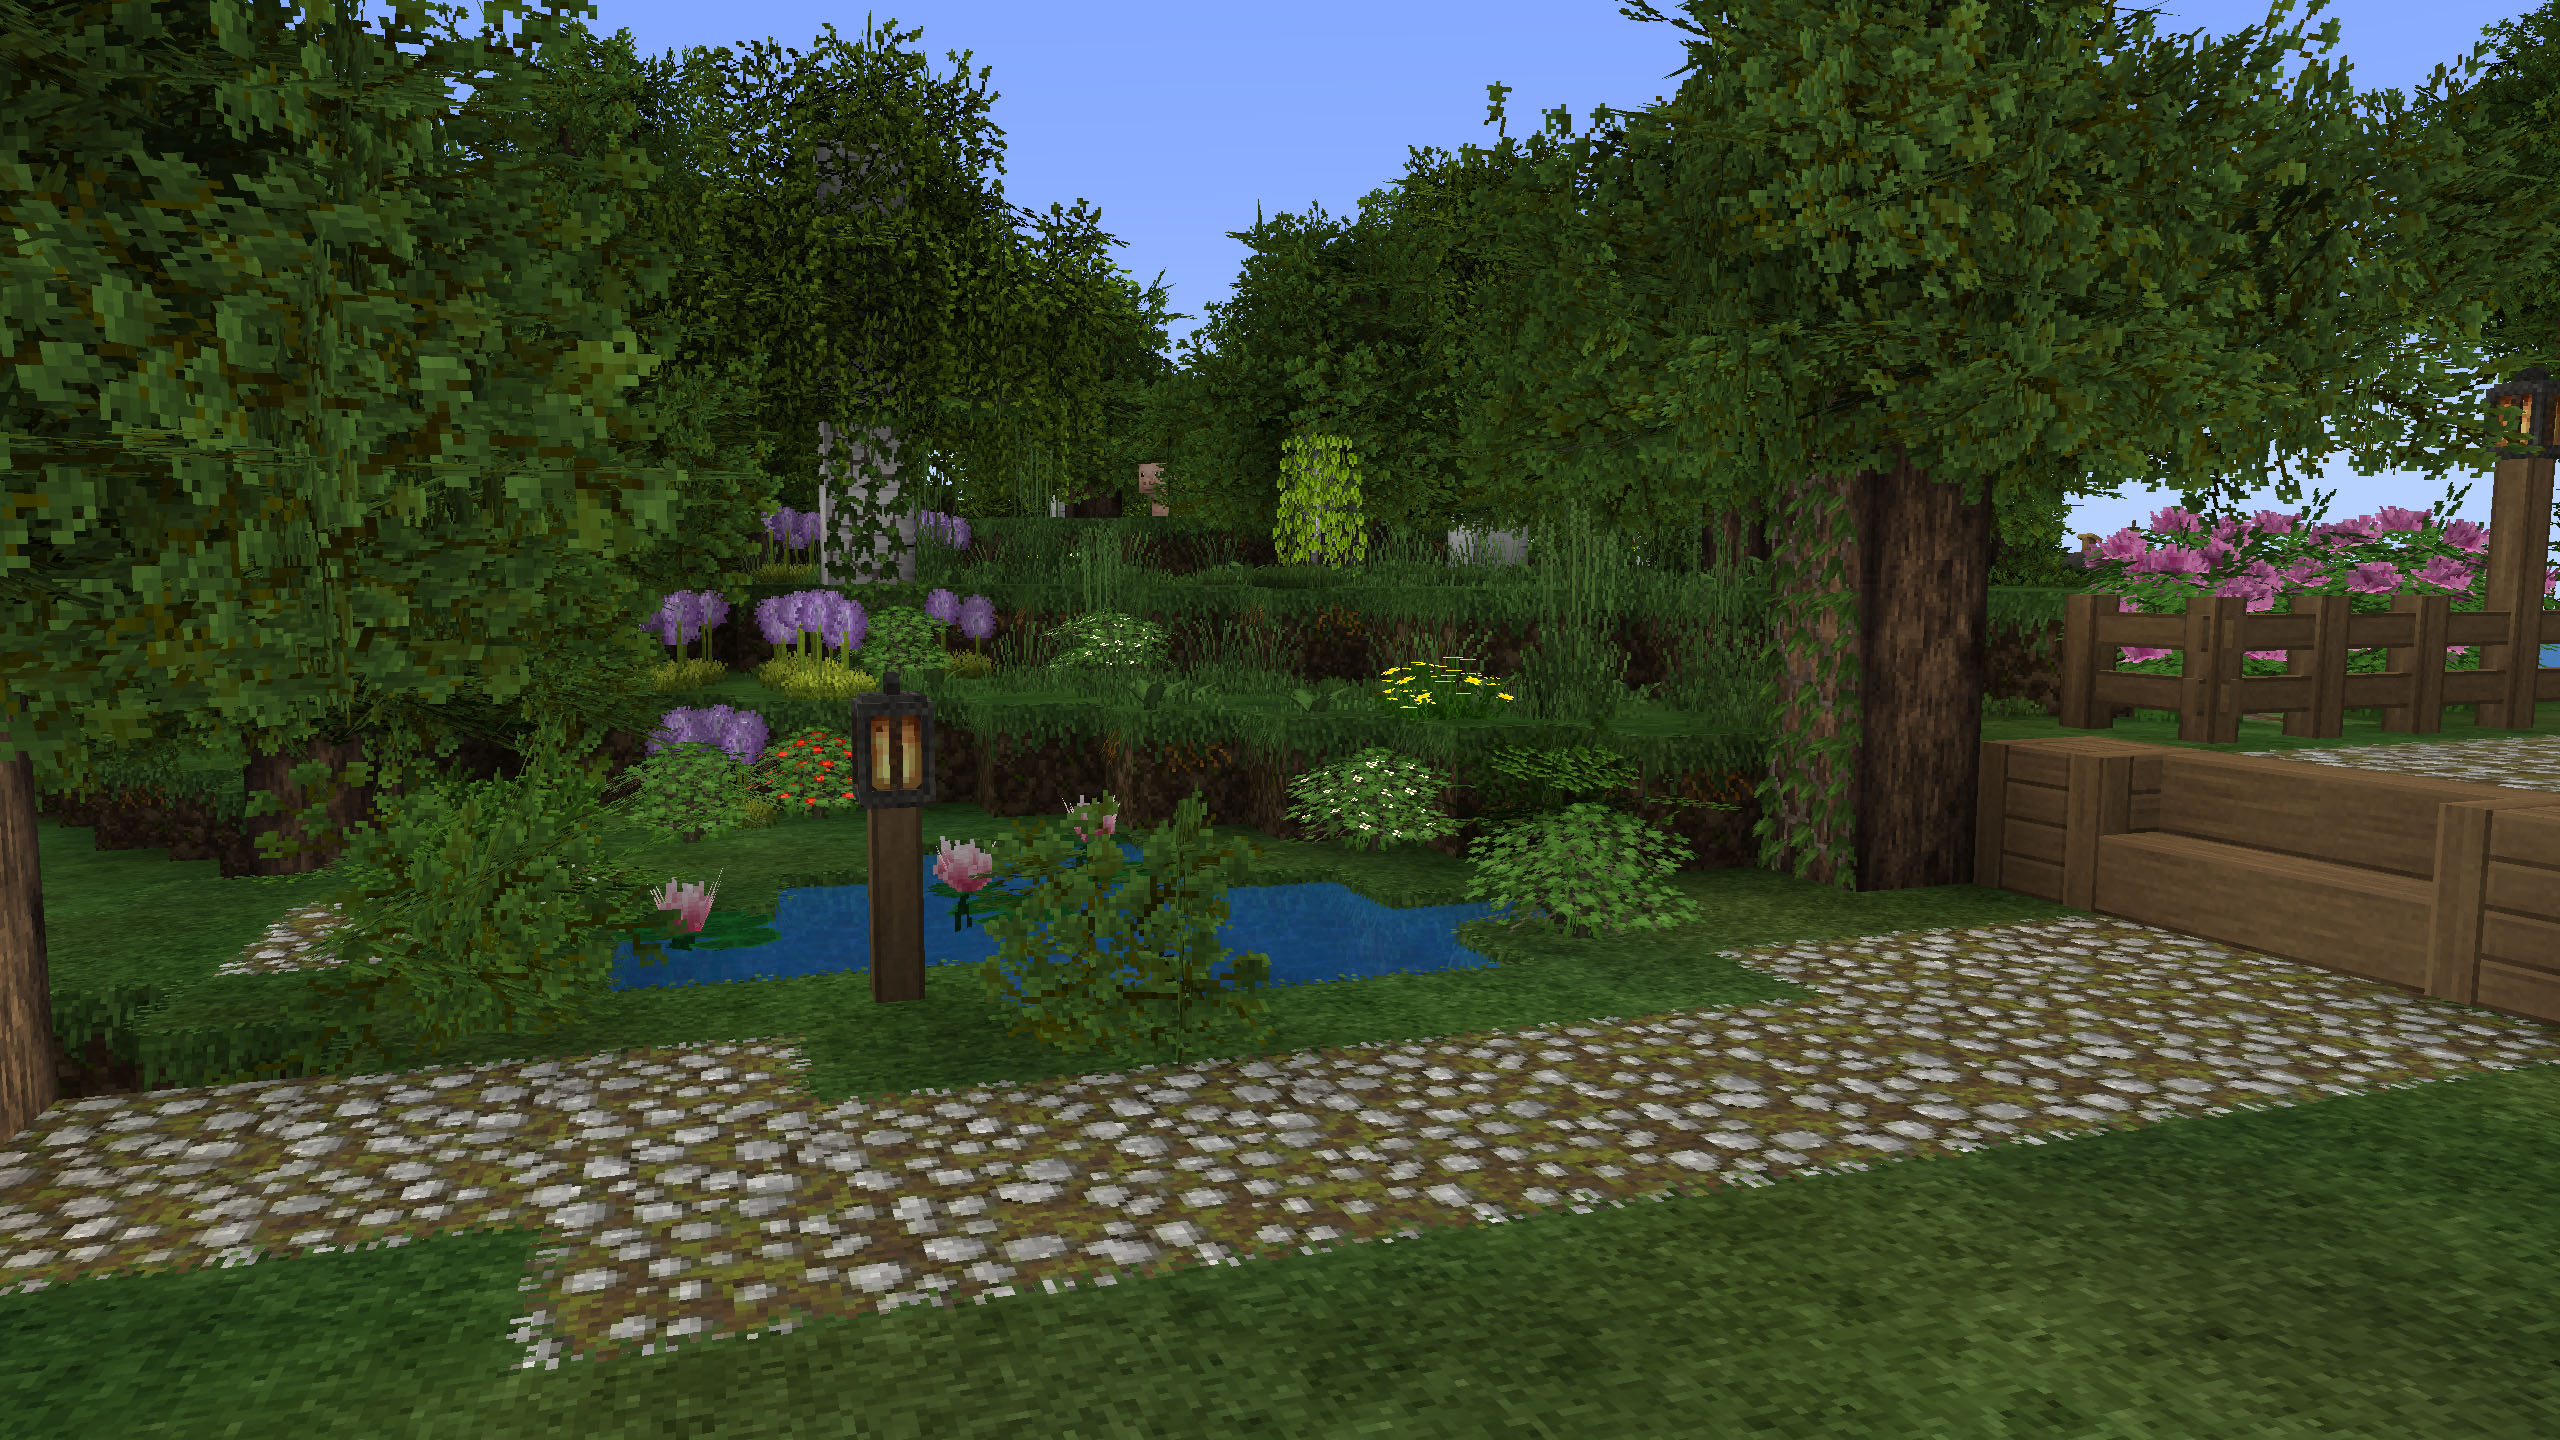 Alacrity Resource Pack 1.20 / 1.19